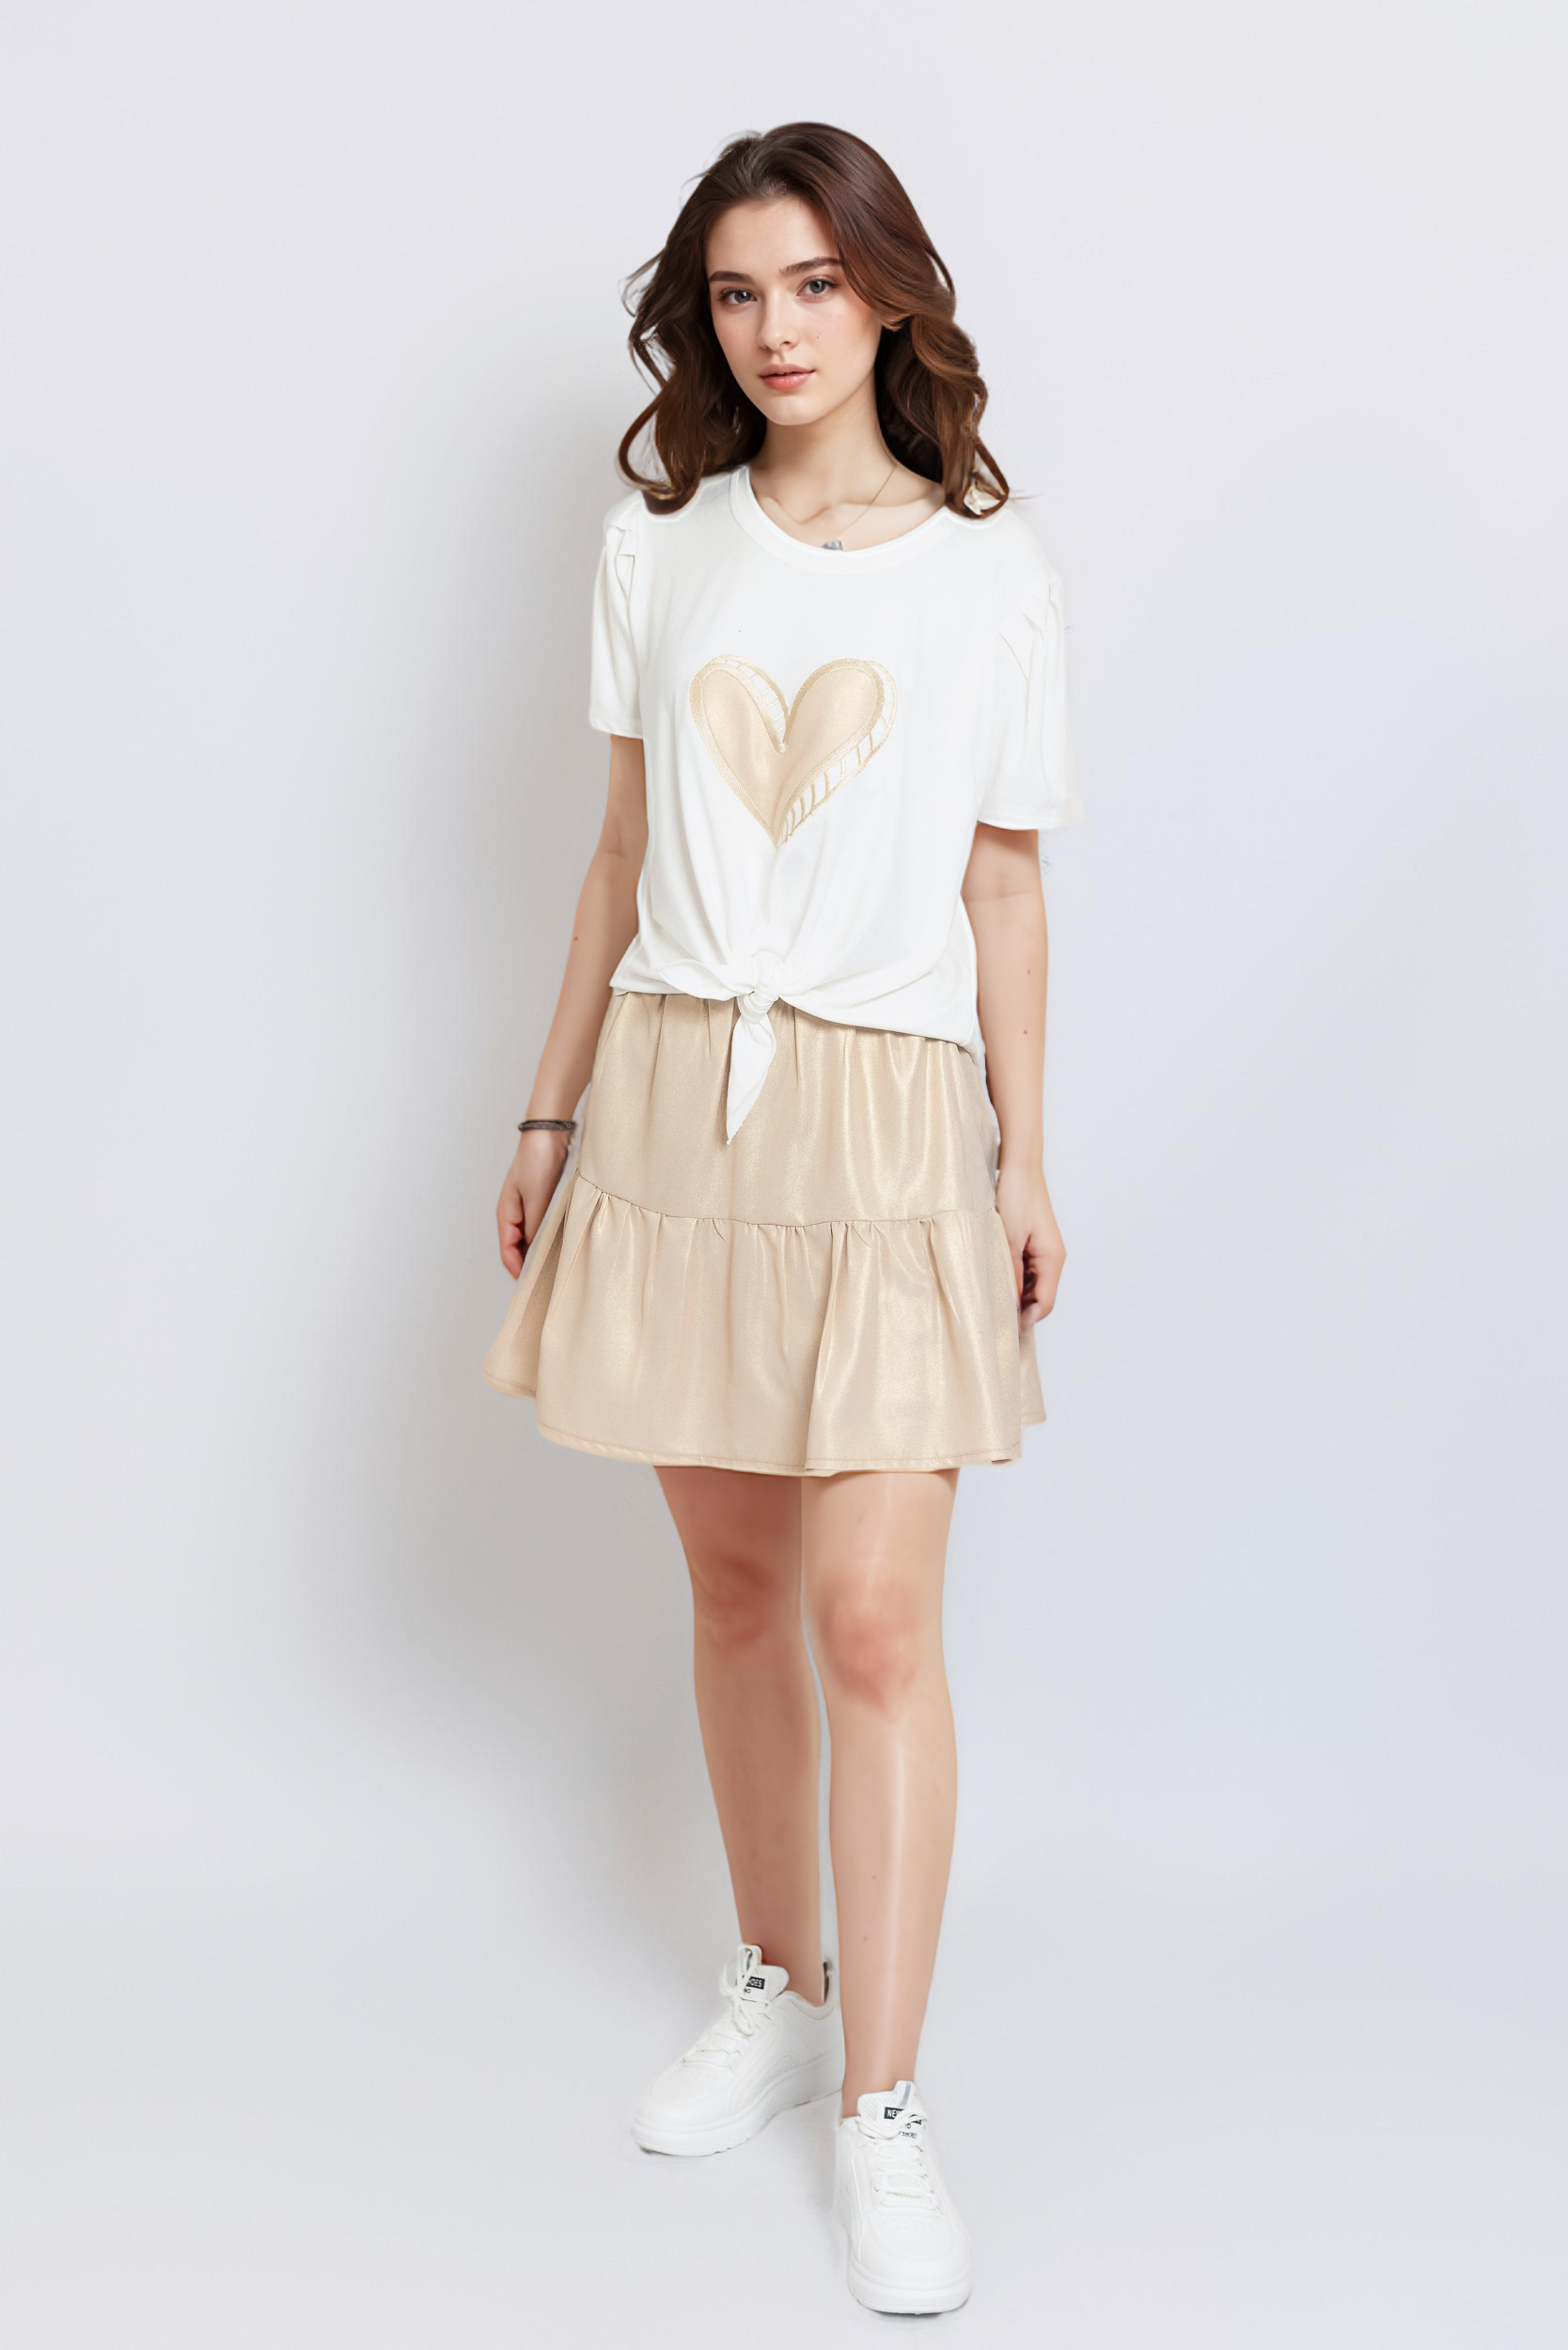 Shiny Heart Top For Women - Off White